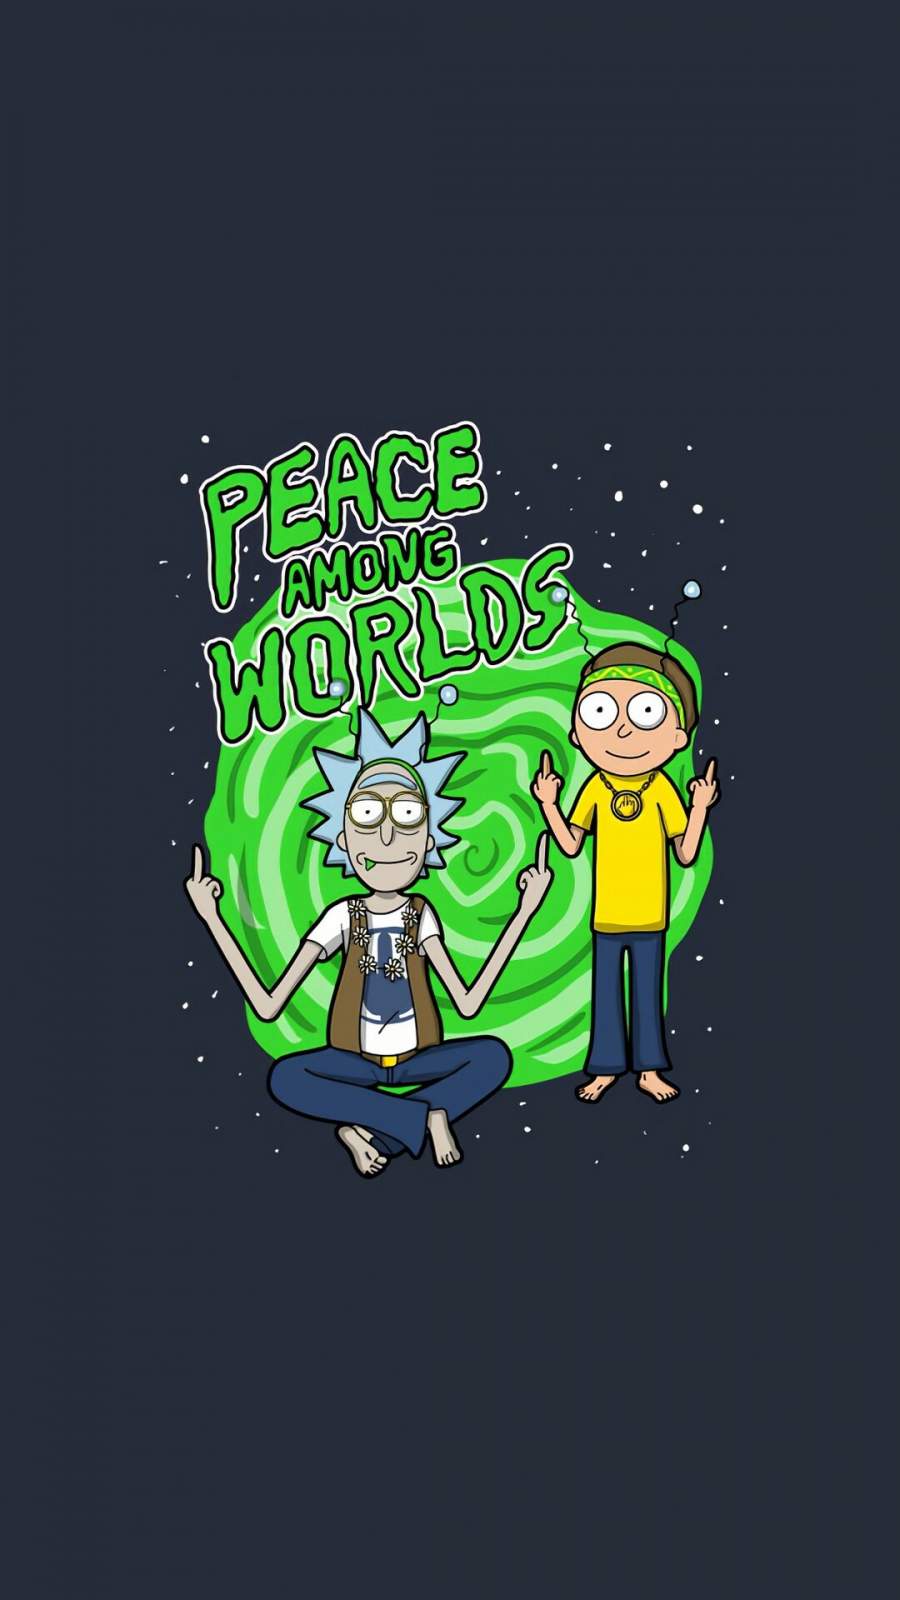 Rick And Morty Peace Among Words IPhone Wallpaper Wallpaper, iPhone Wallpaper